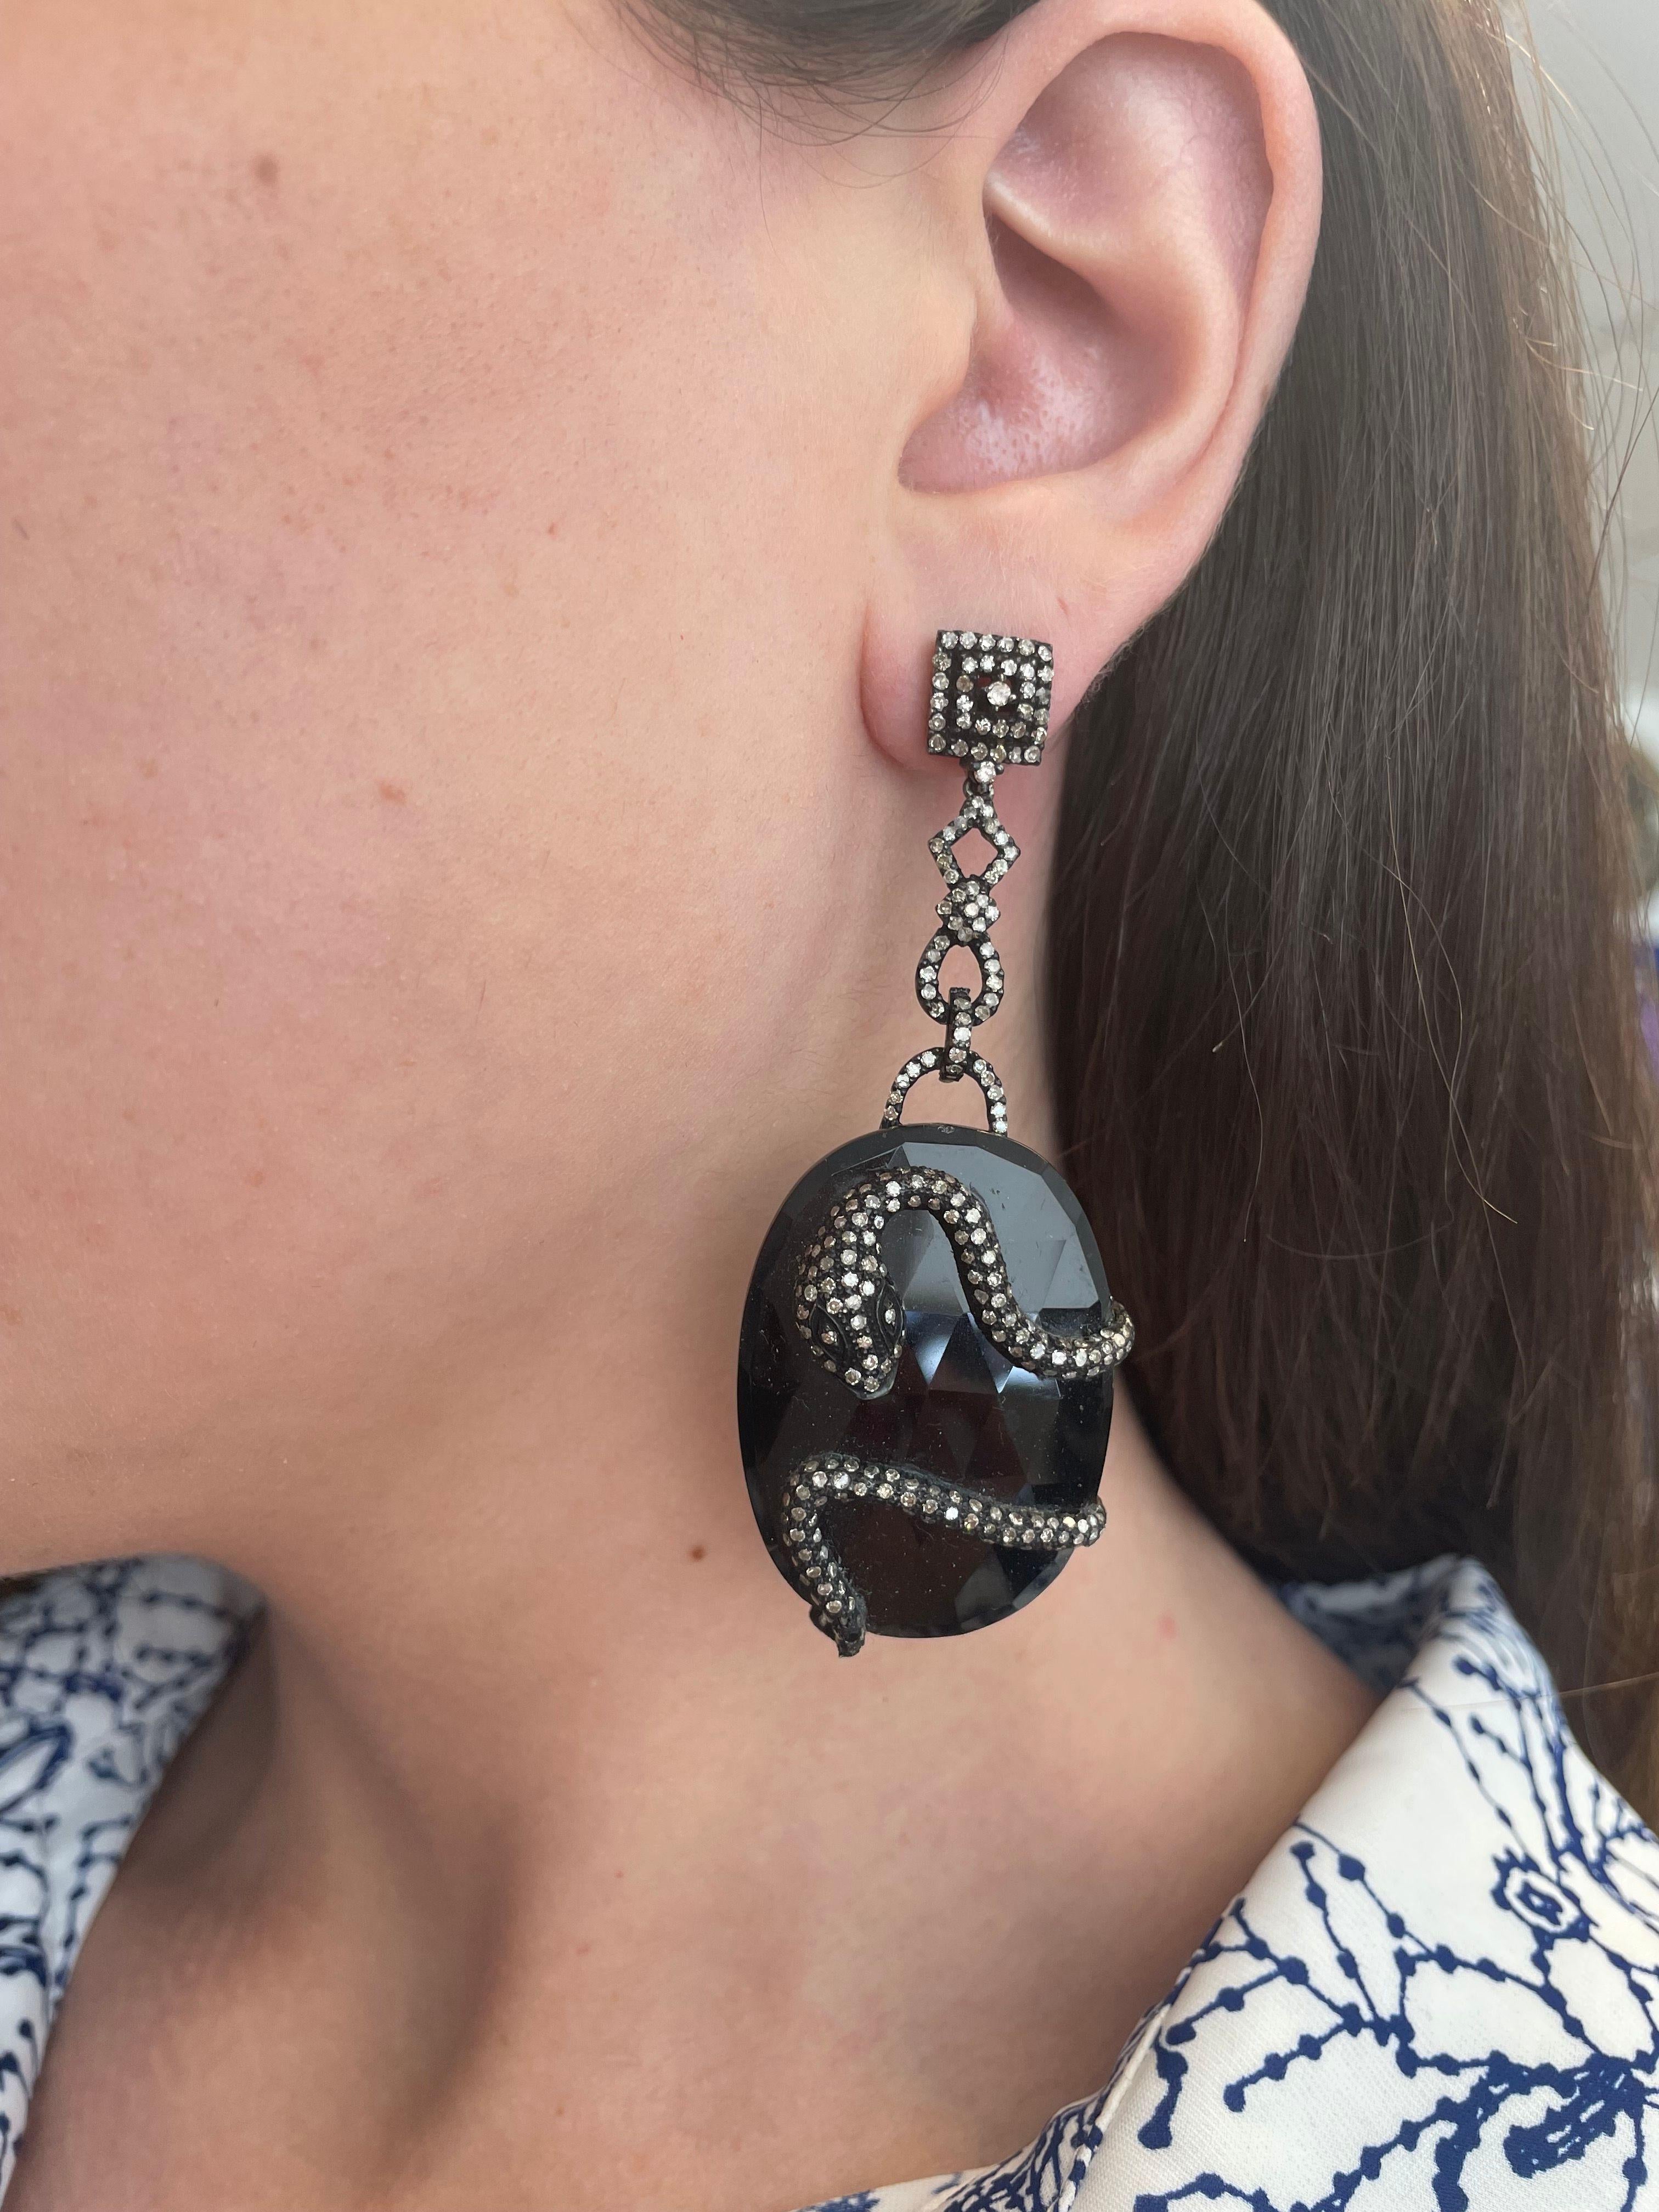 Statement Victorian inspired snake dangle earrings.
Approximately 2.40 carats of round cut diamonds, L/M color, and SI clarity on onyx. Silver and gold.
Accommodated with an up to date appraisal by a GIA G.G. upon request. Please contact us with any